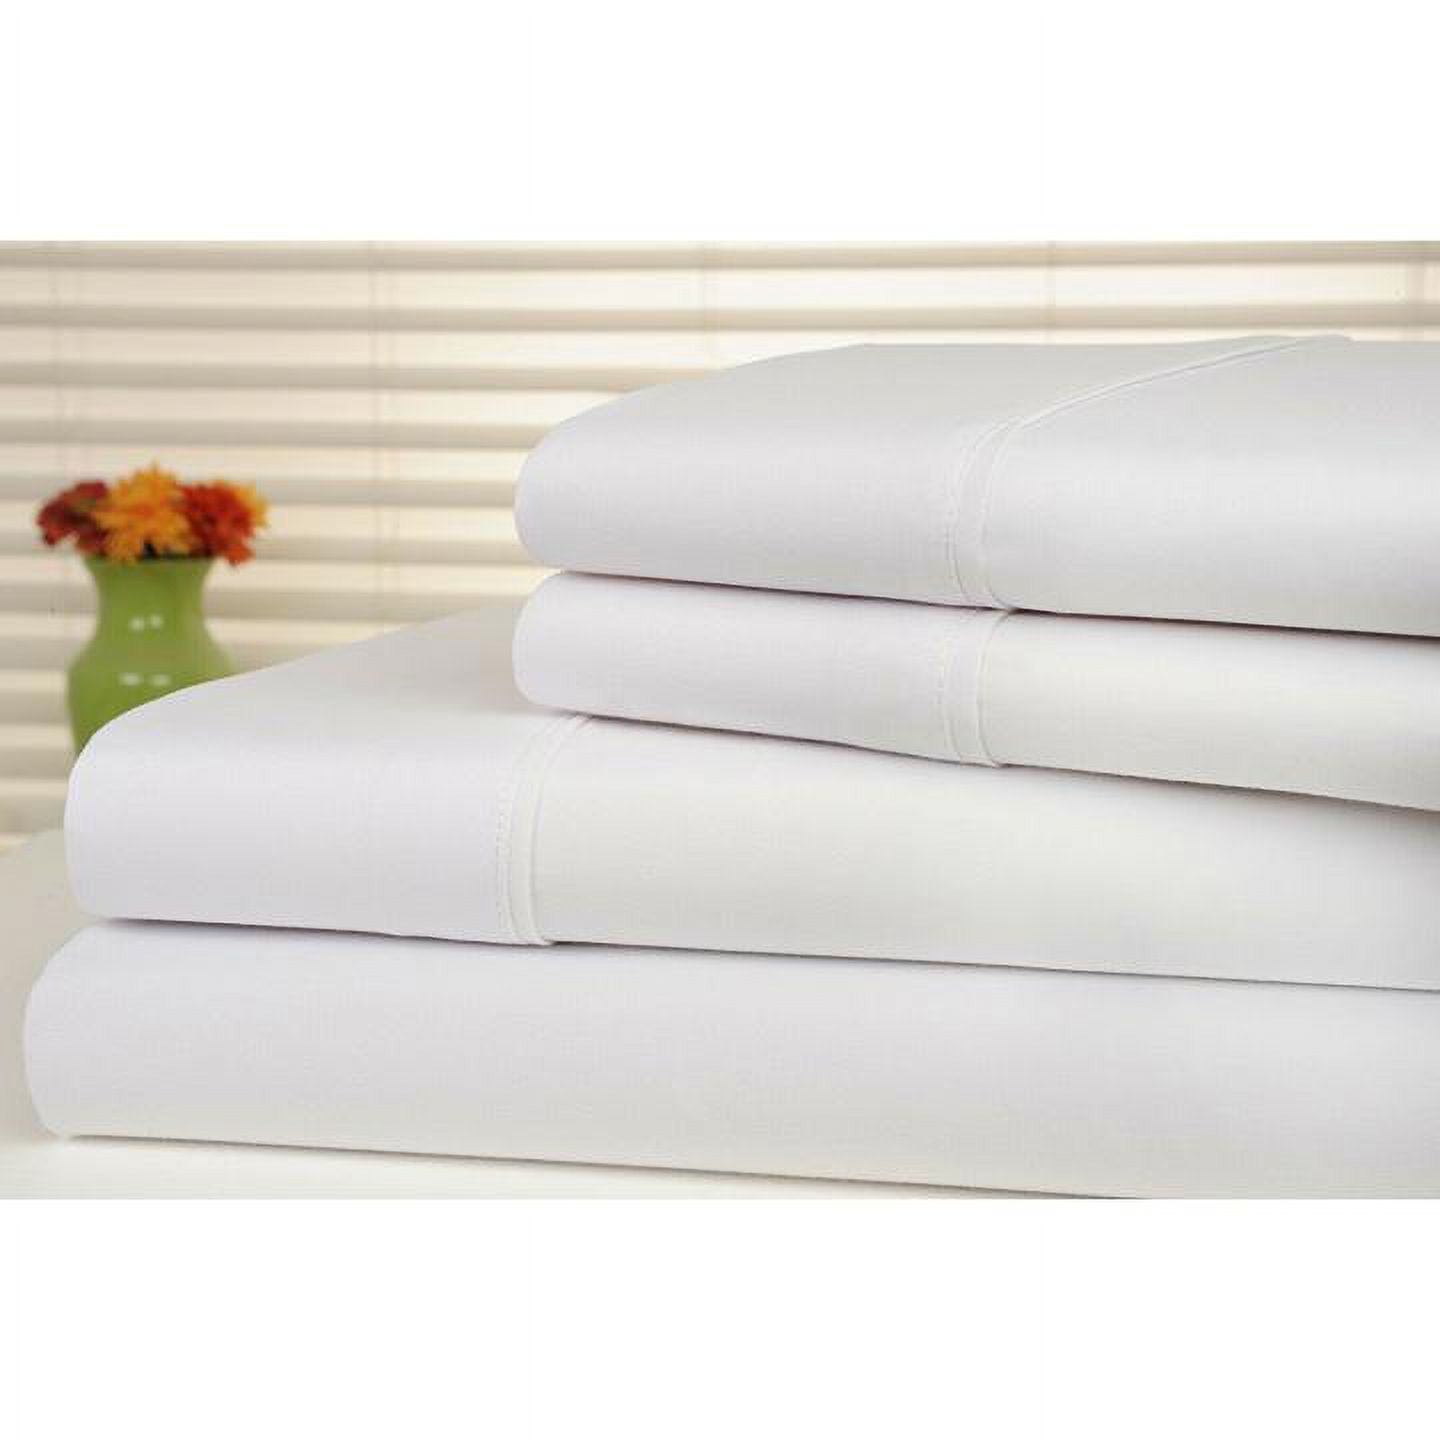 Bamboo Comfort  King Size Bamboo Luxury Solid Sheet Set, White - 4 Piece - image 21 of 21